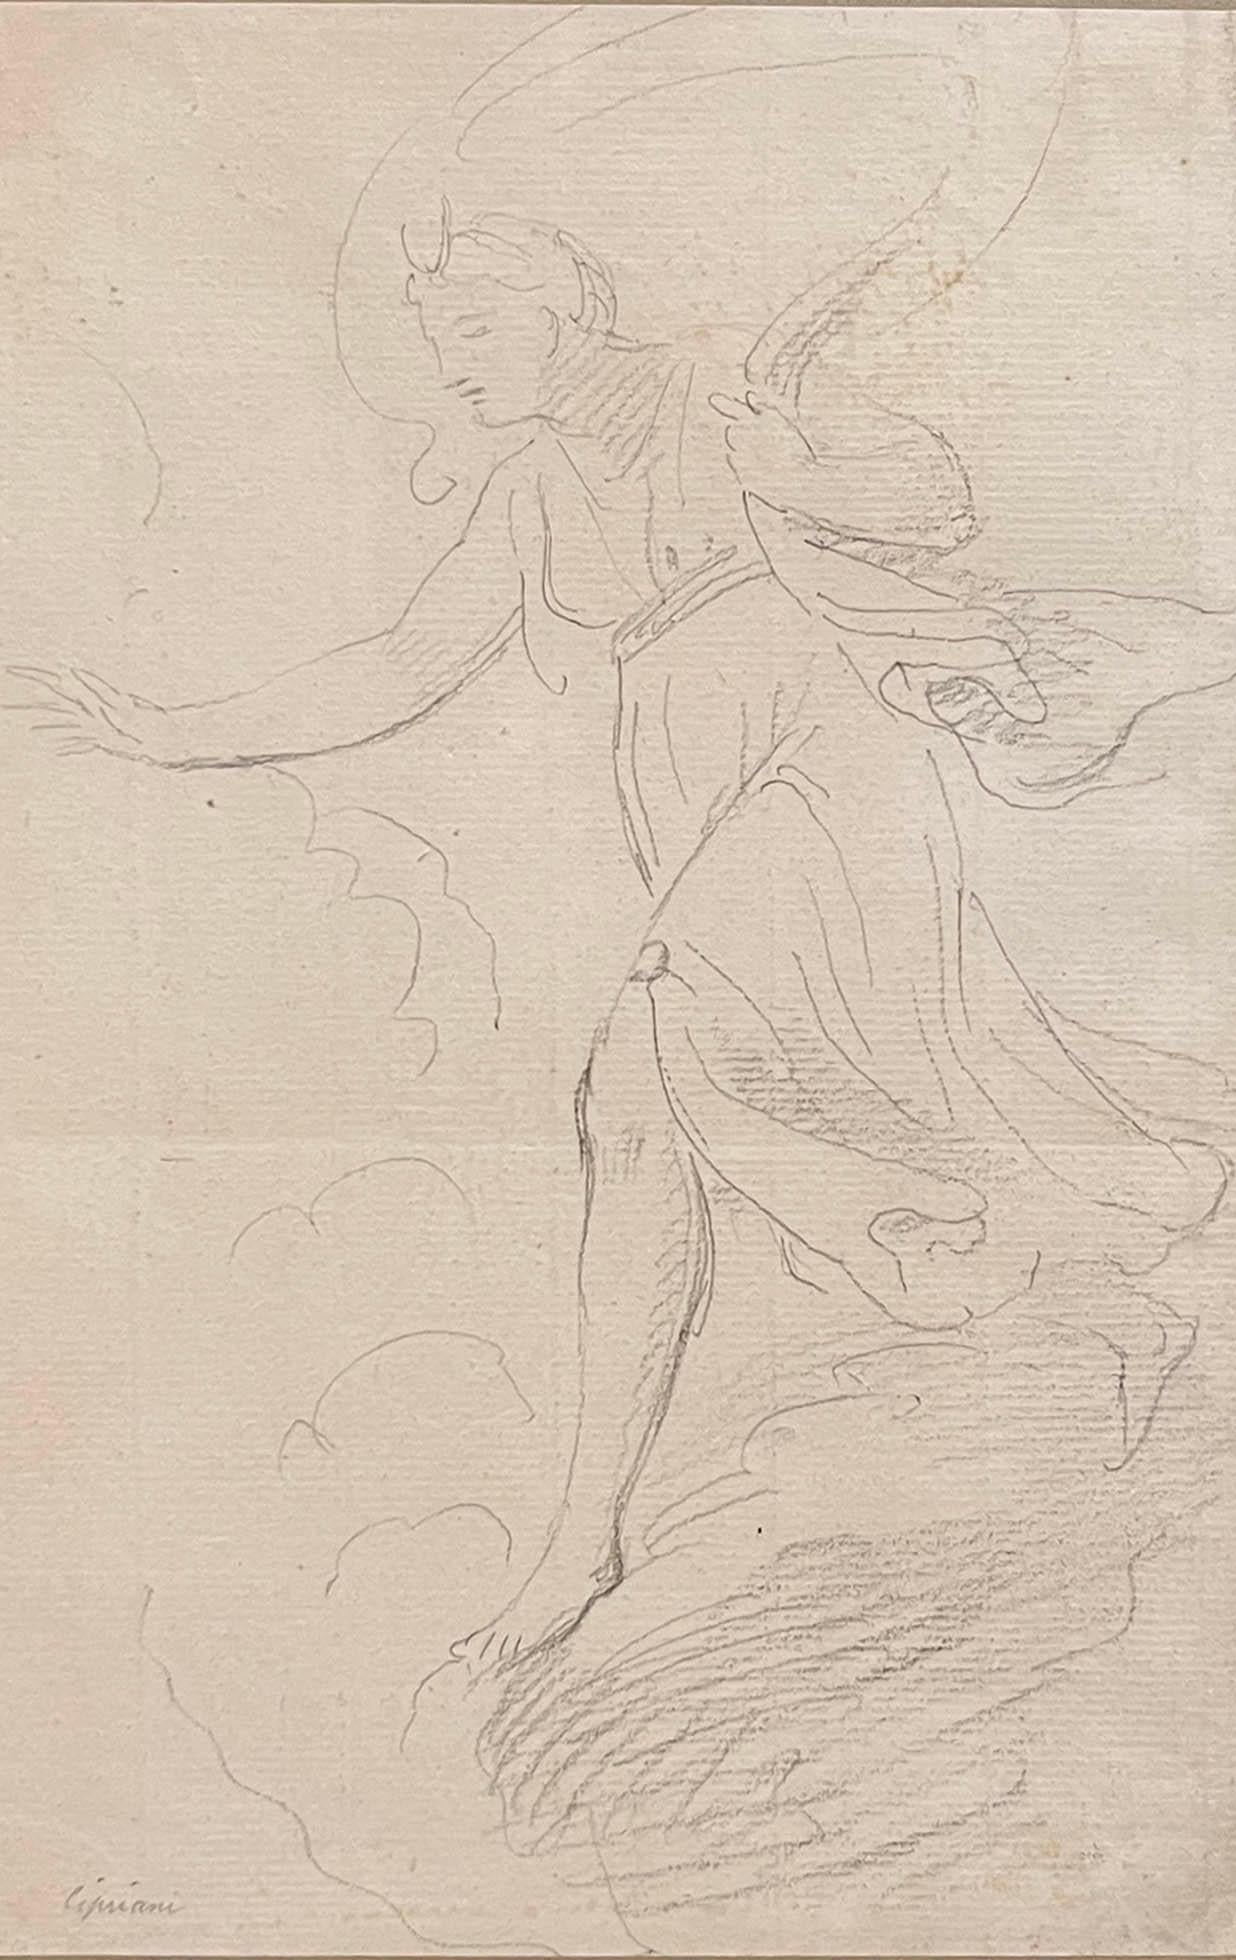 A framed Baroque pencil study for a Diana and Endymion composition attributed to Giovanni Battista Cipriani

Attributed to Giovanni Battista Cipriani
Probably London, England; third quarter of the 18th century
Pencil on laid paper; matted and